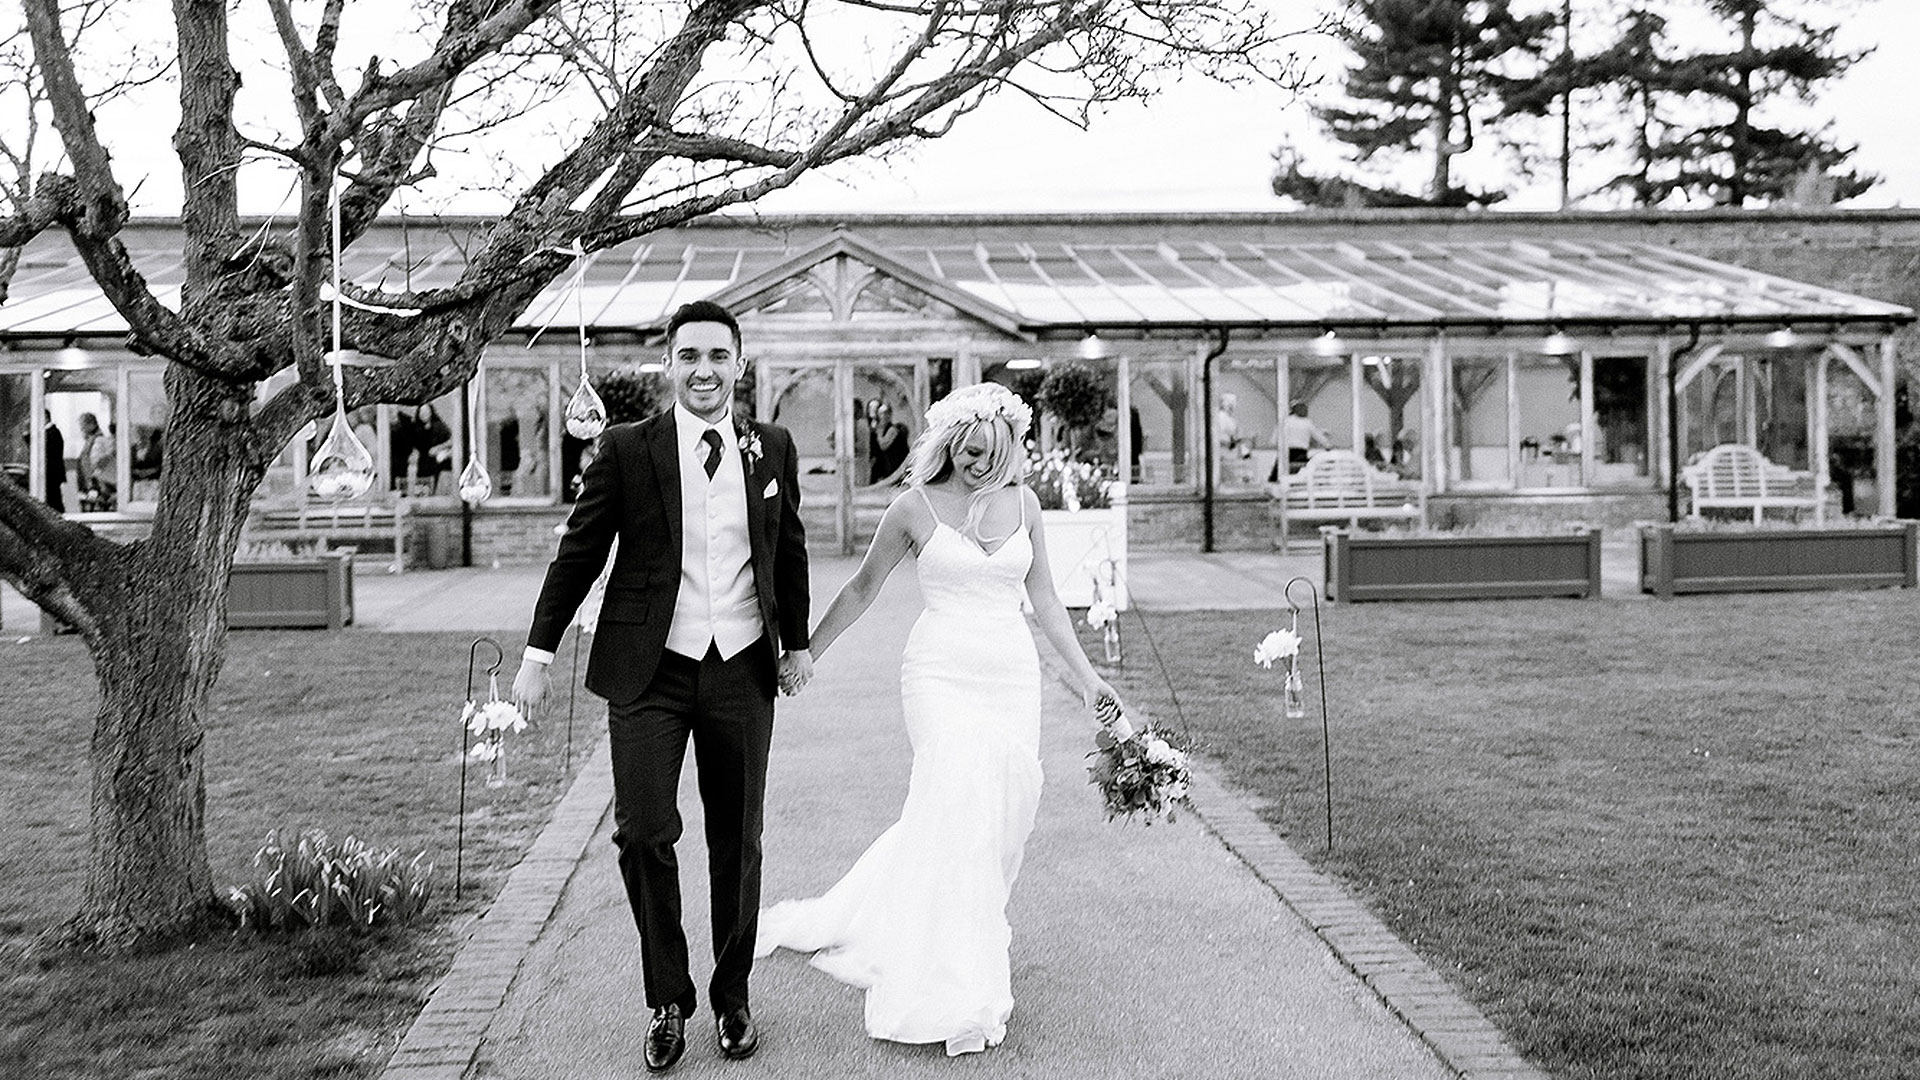 A happy bride and groom walk away from the Orangery after saying their marriage vows in a wedding ceremony